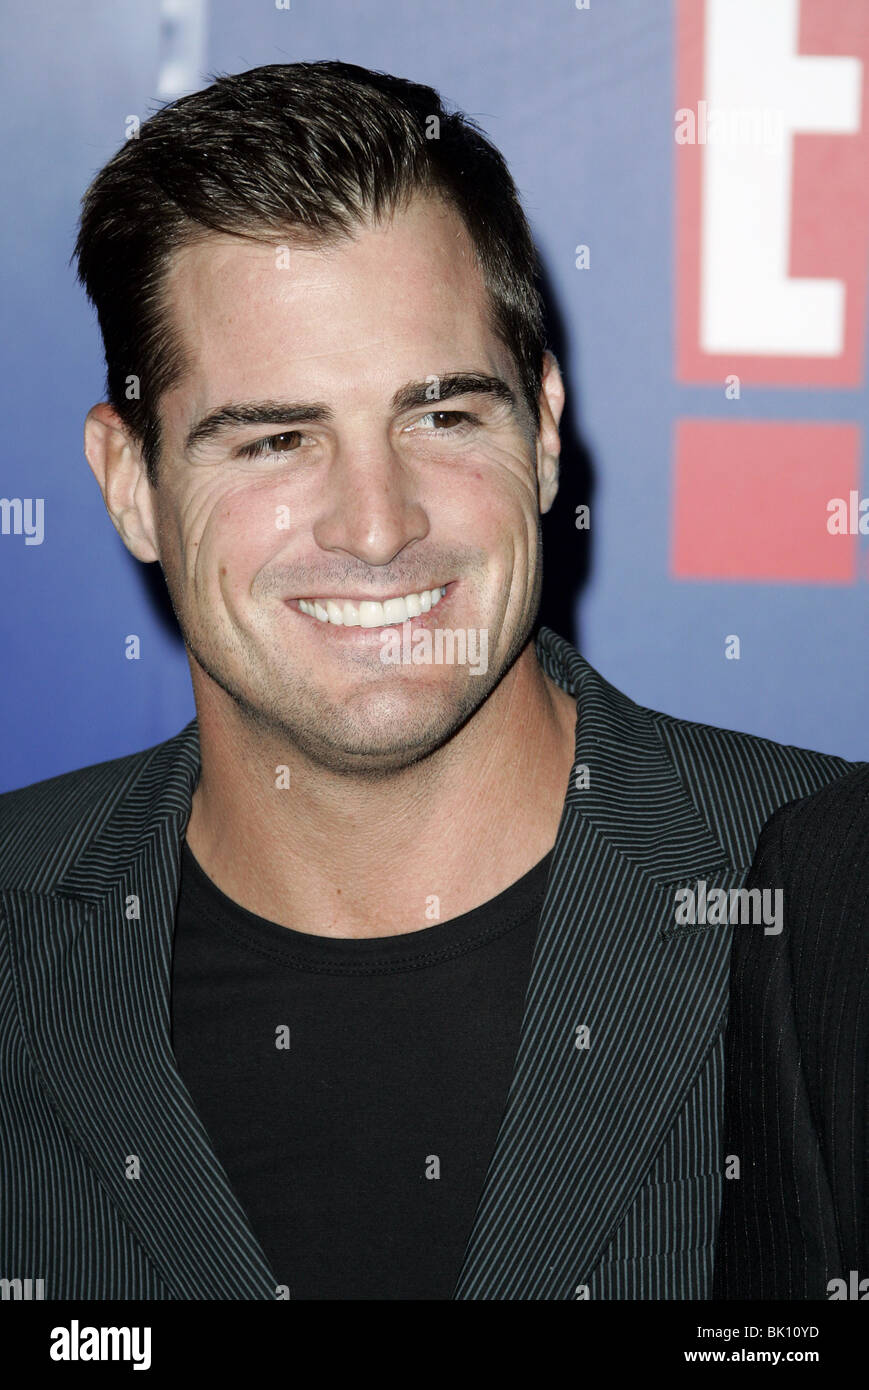 GEORGE EADS 2005 TAURUS WORLD STUNT AWARDS PARAMOUNT STUDIOS HOLLYWOOD LOS ANGELES USA 25 Septembre 2005 Banque D'Images